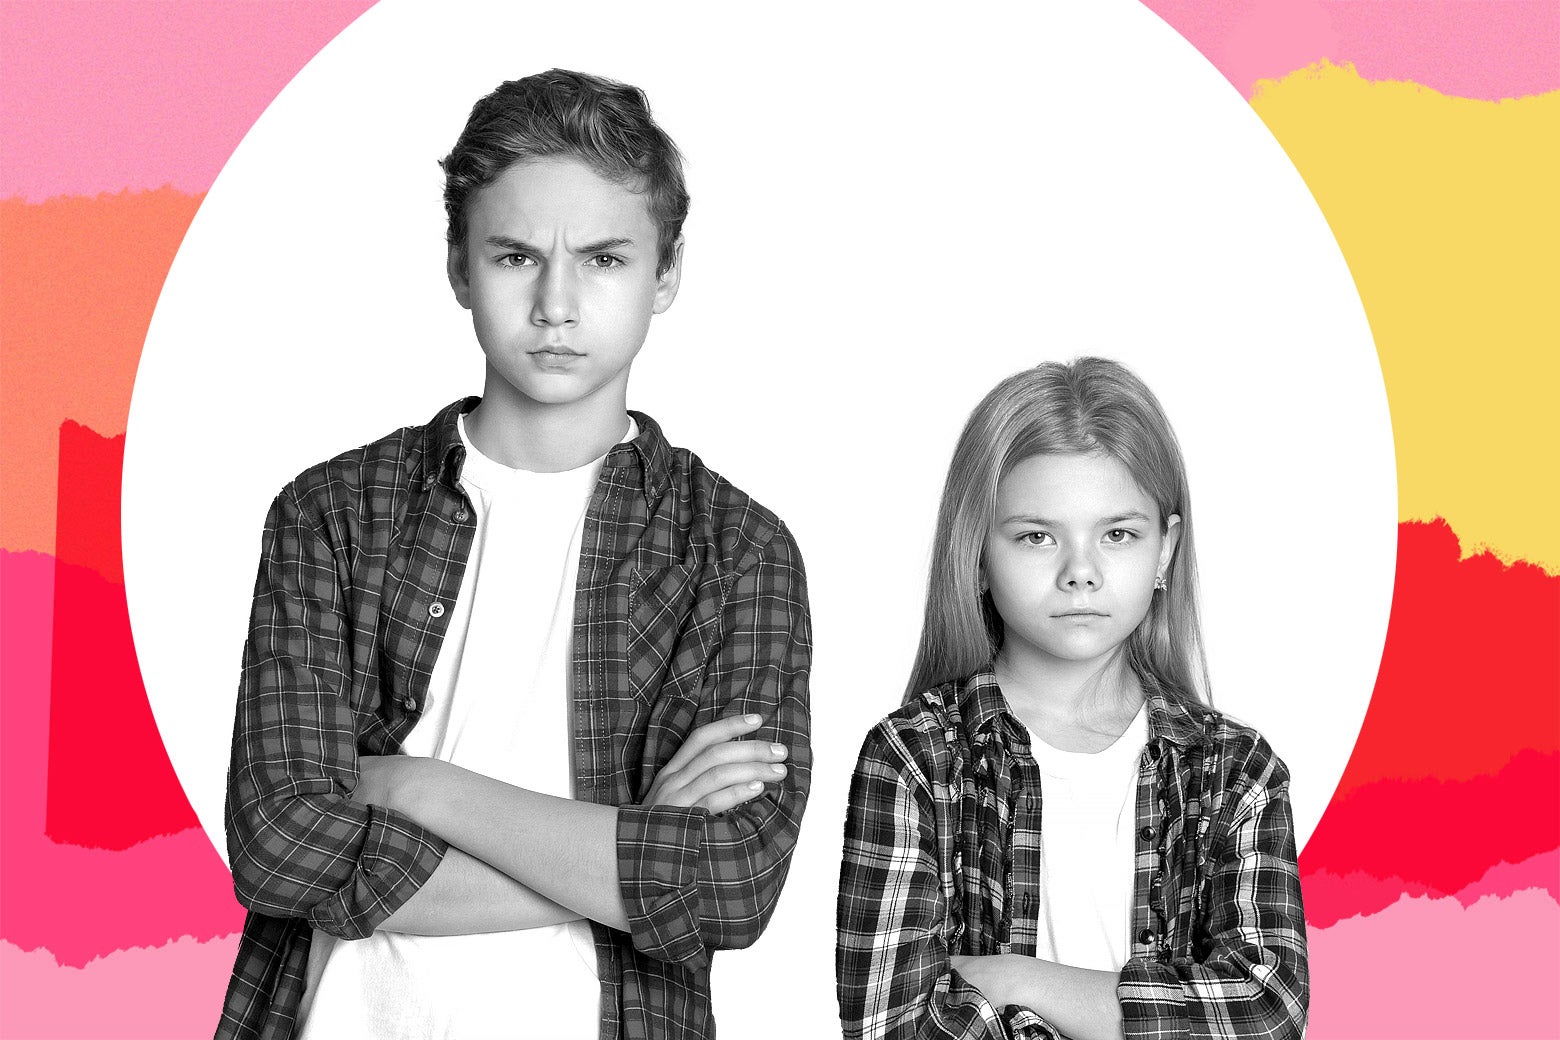 A young boy and girl looking annoyed with their arms folded.